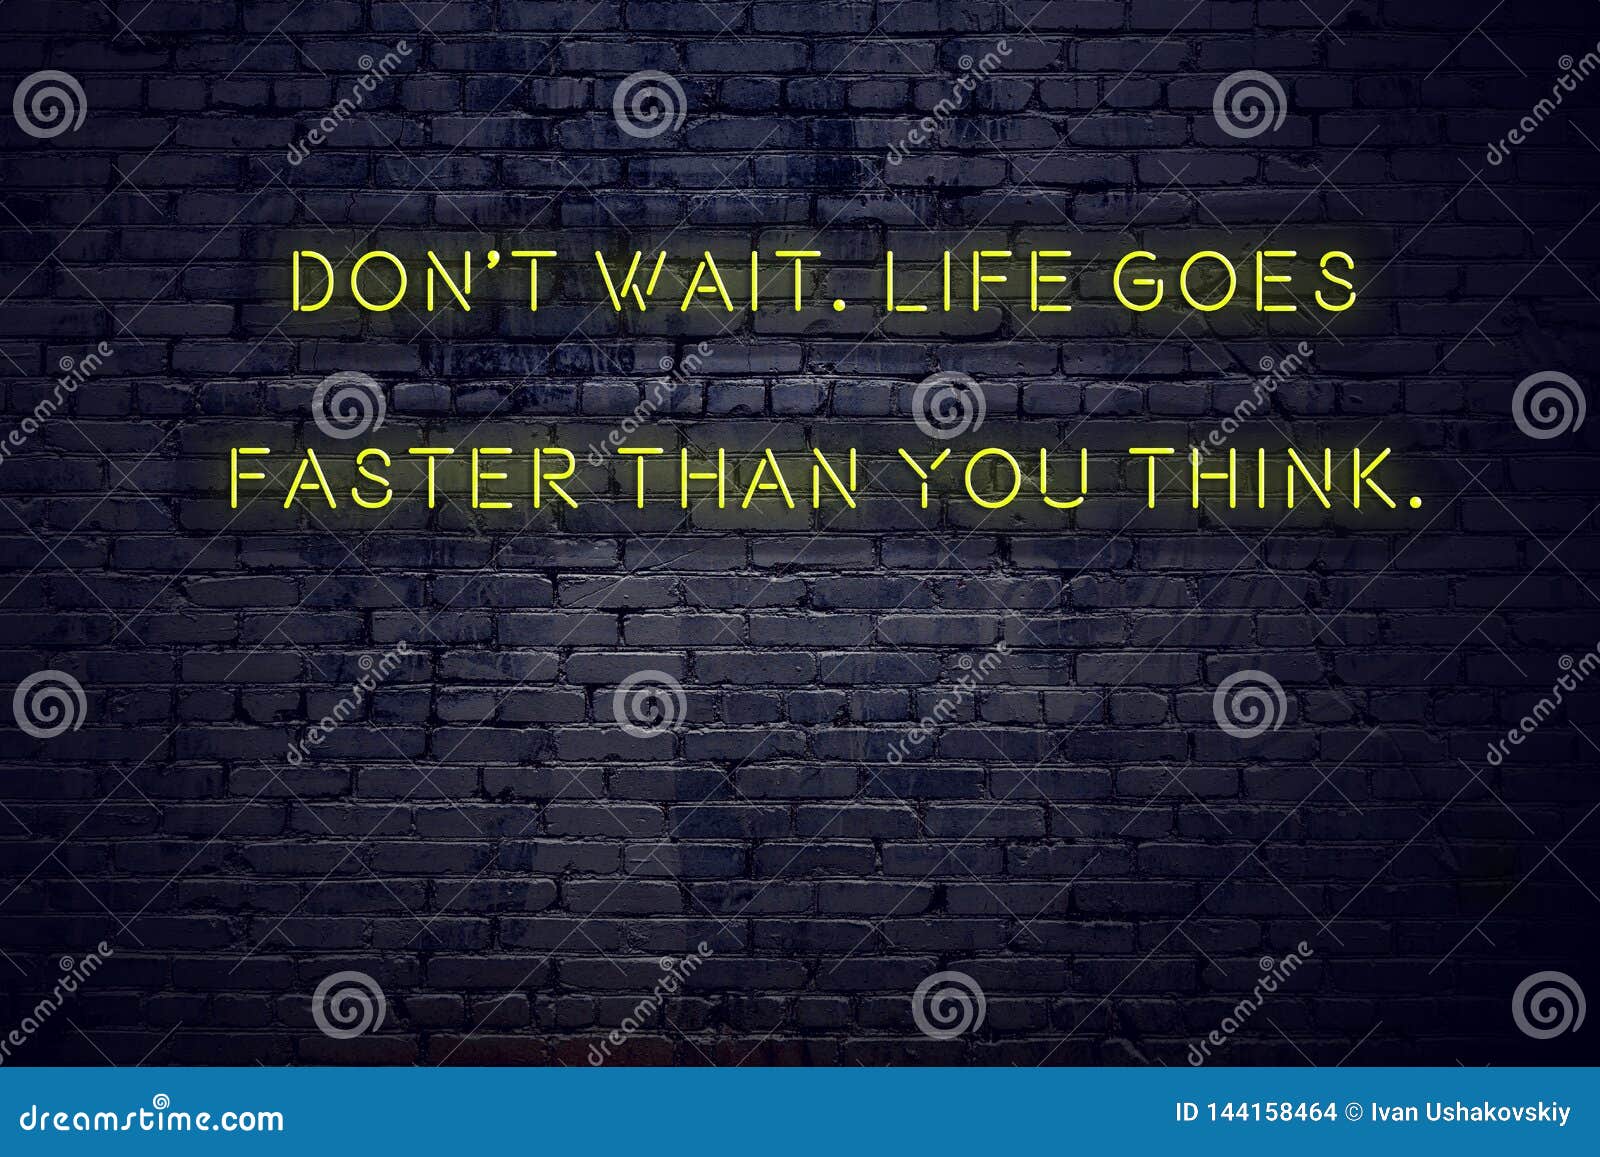 Positive Inspiring Quote On Neon Sign Against Brick Wall Dont Wait Life Goes Faster Than You